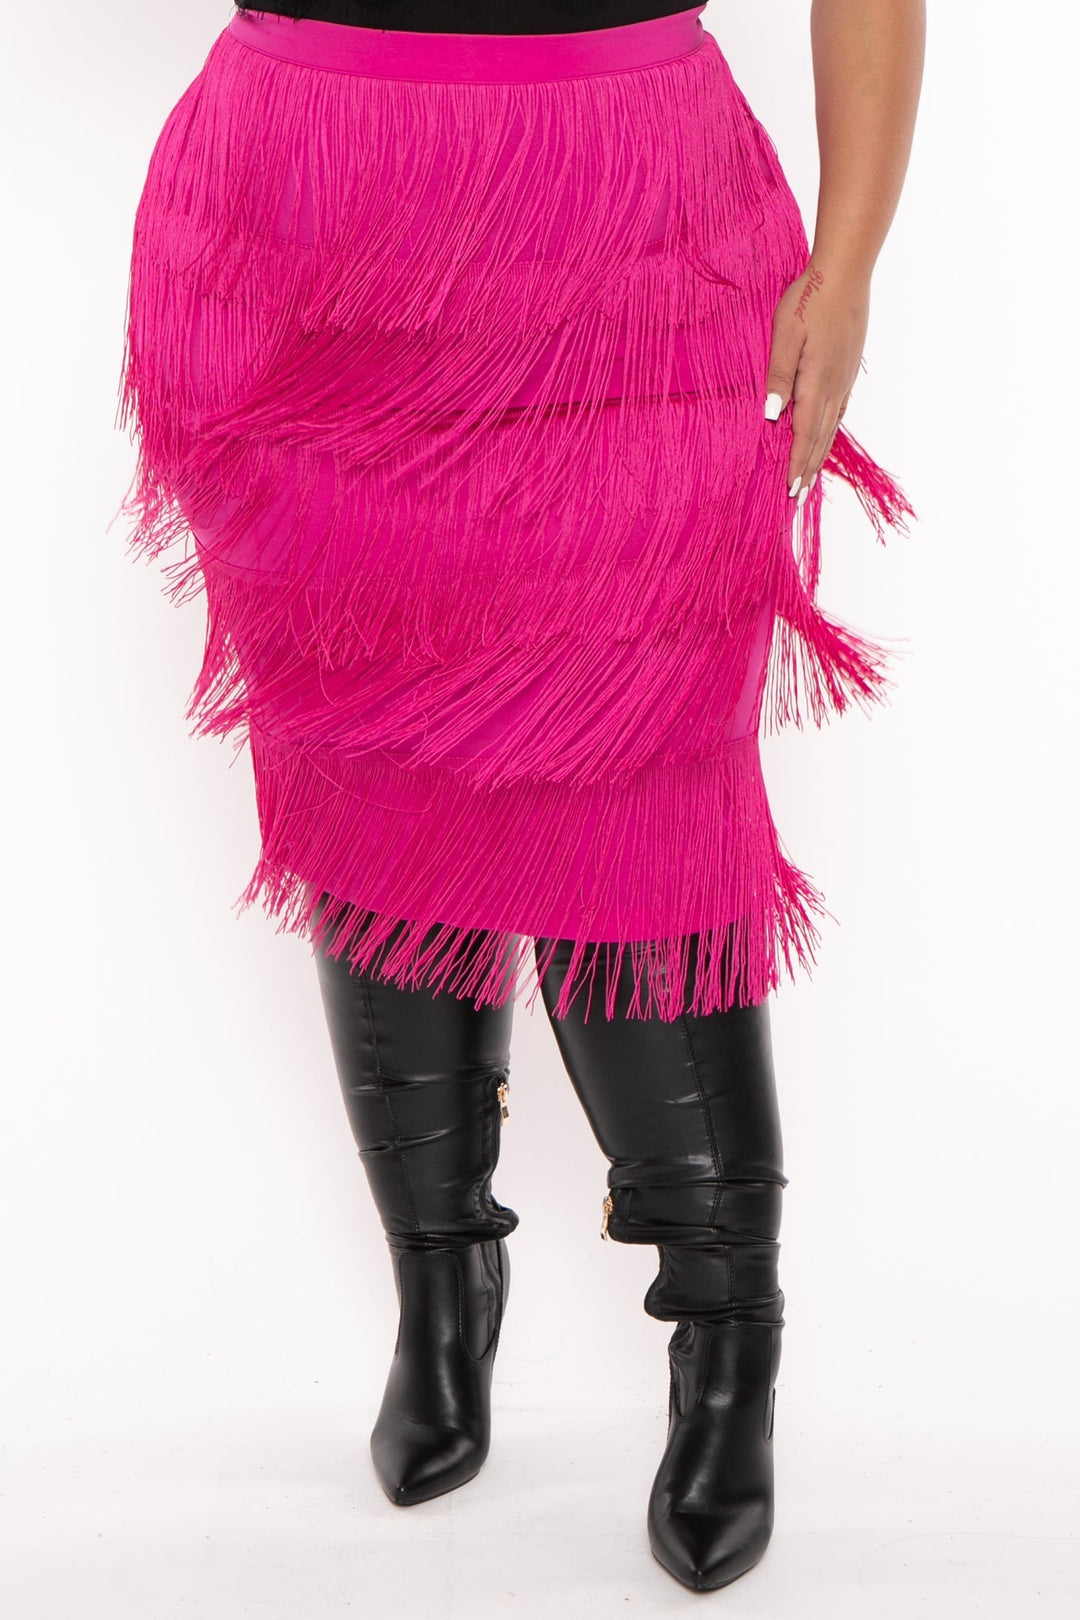 CHICCTHY TOP Bottoms 1X / Pink Plus Size Nyra Fringe Midi Skirt  - Pink